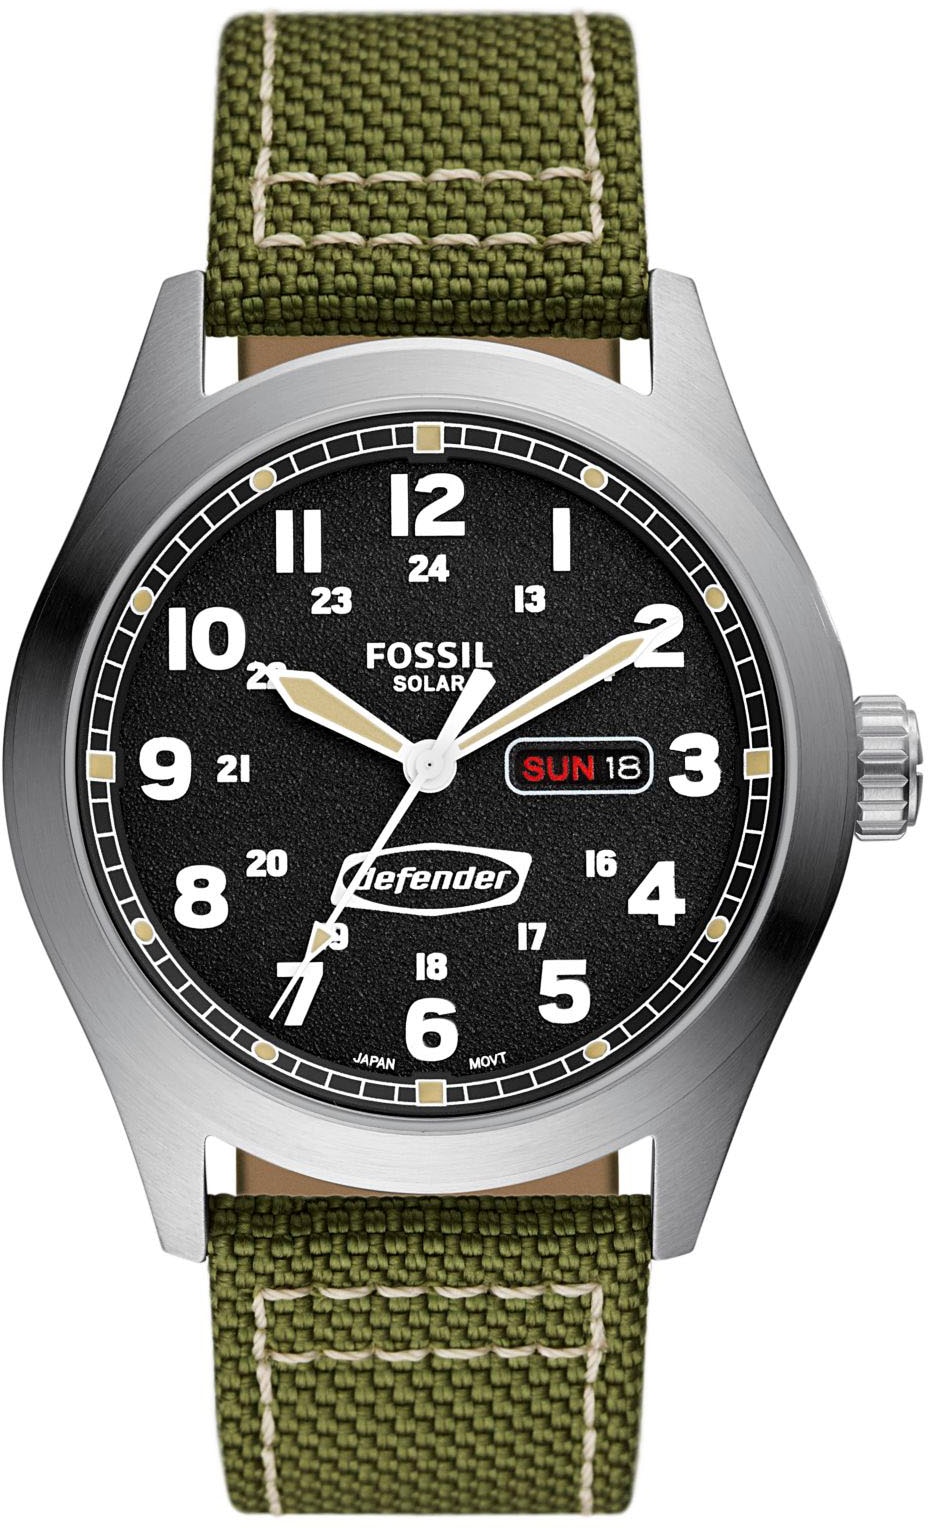 Fossil Solaruhr »DEFENDER, FS5977«, limited edition bei online OTTO shoppen